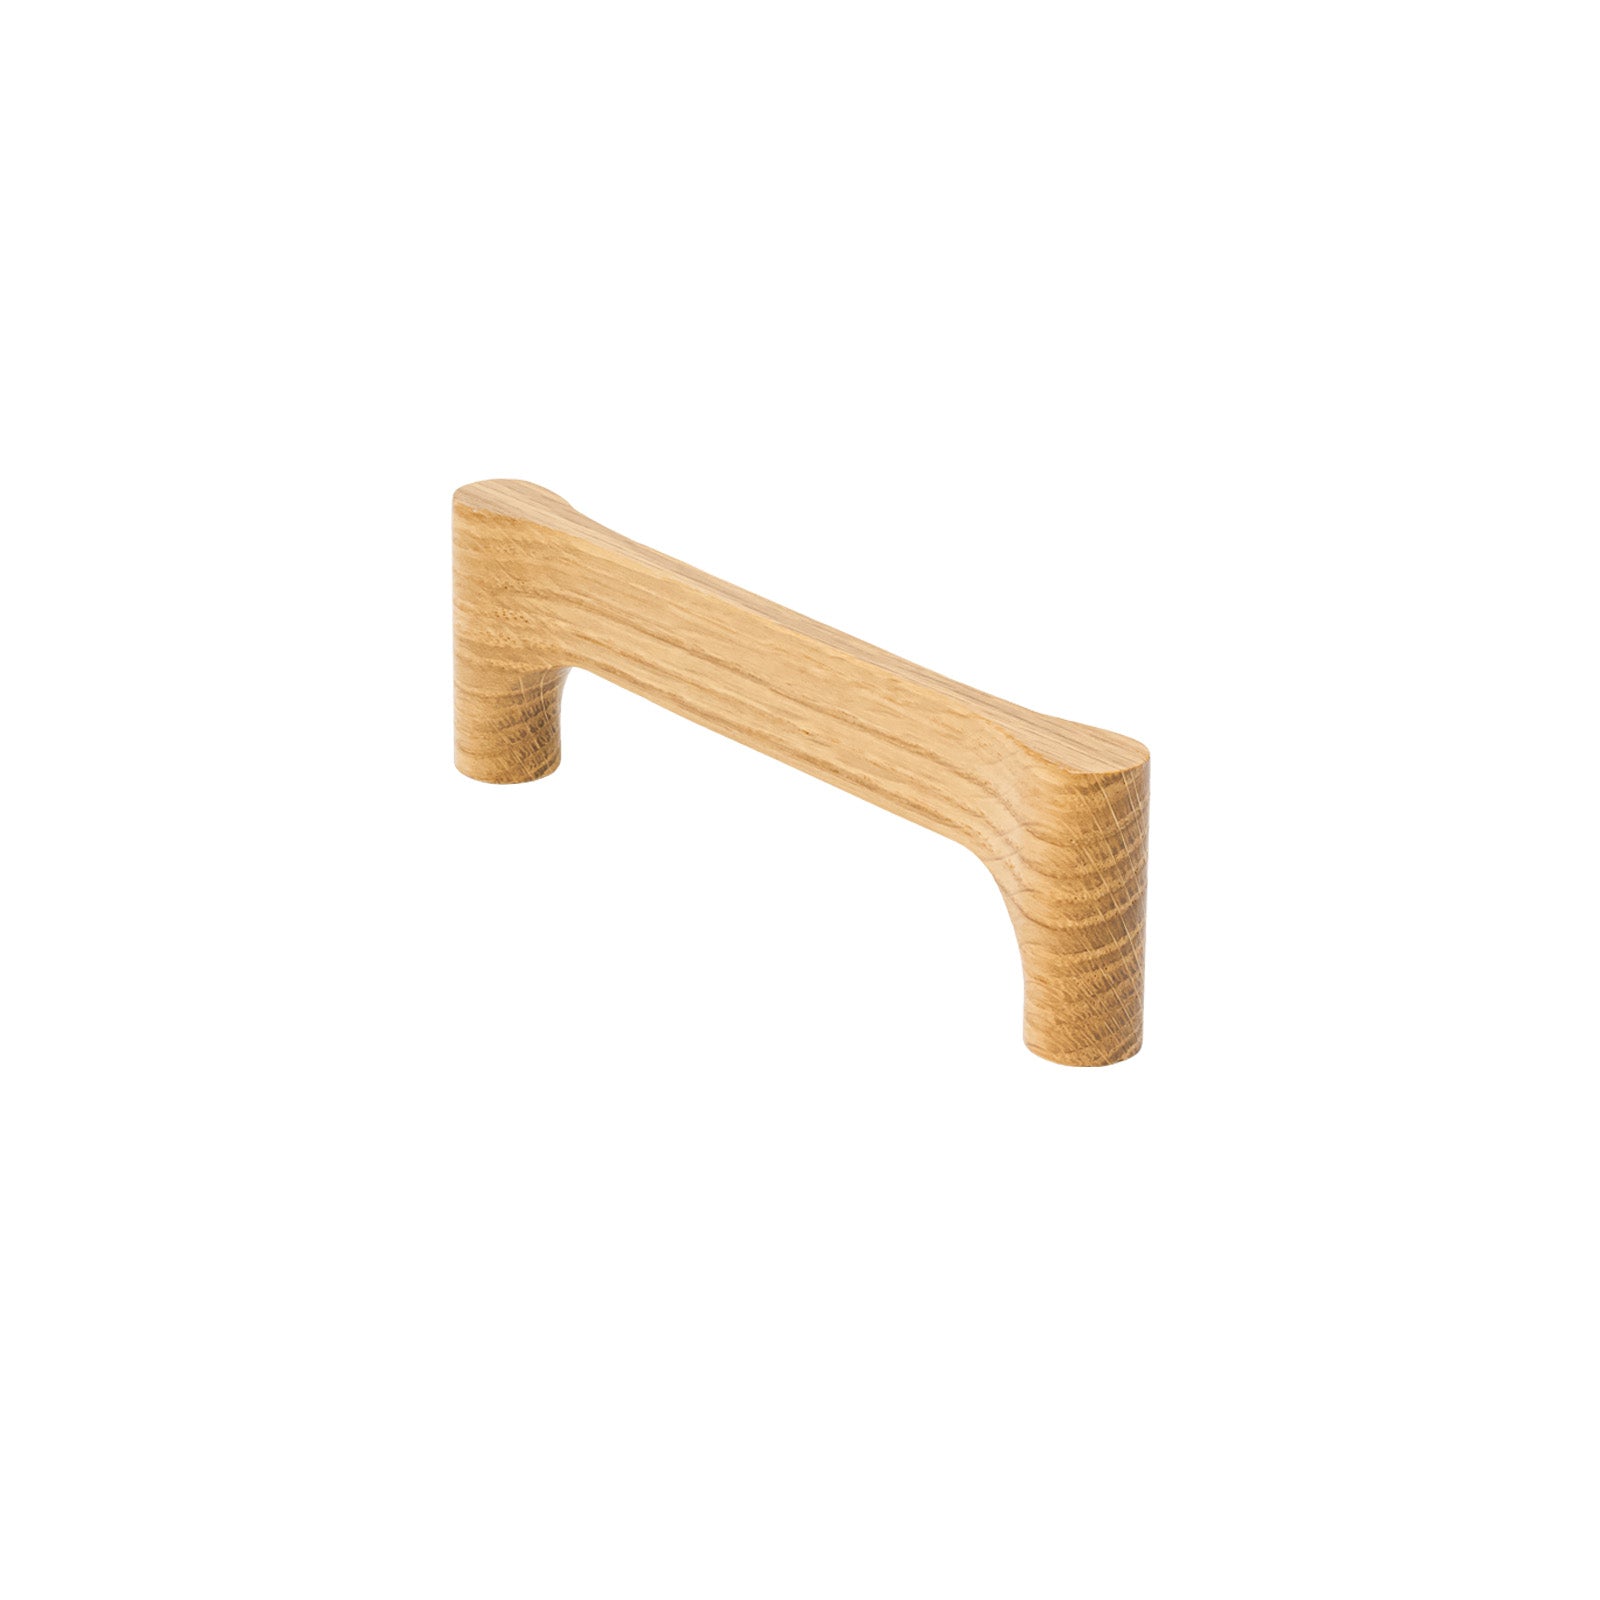 SHOW 128mm Gio Cabinet Pull Handle In Oak Finish